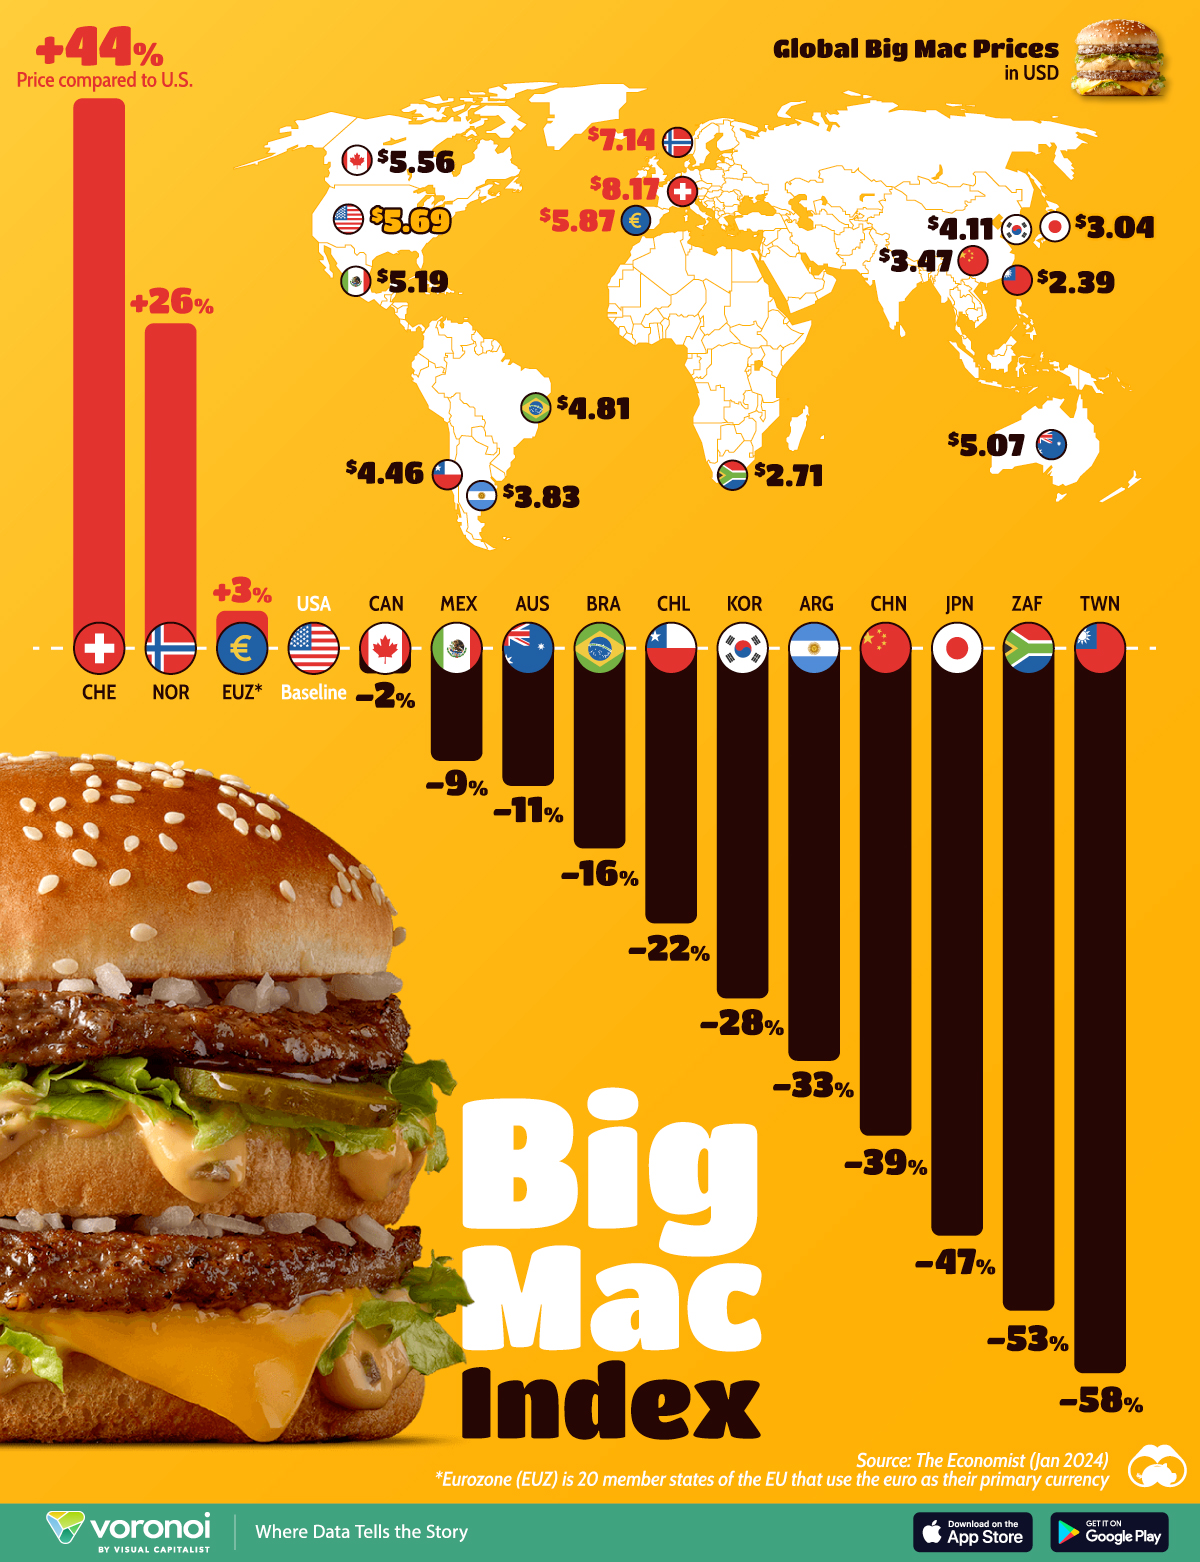 An infographic showing the price of Big Macs in USD in several countries across the world.